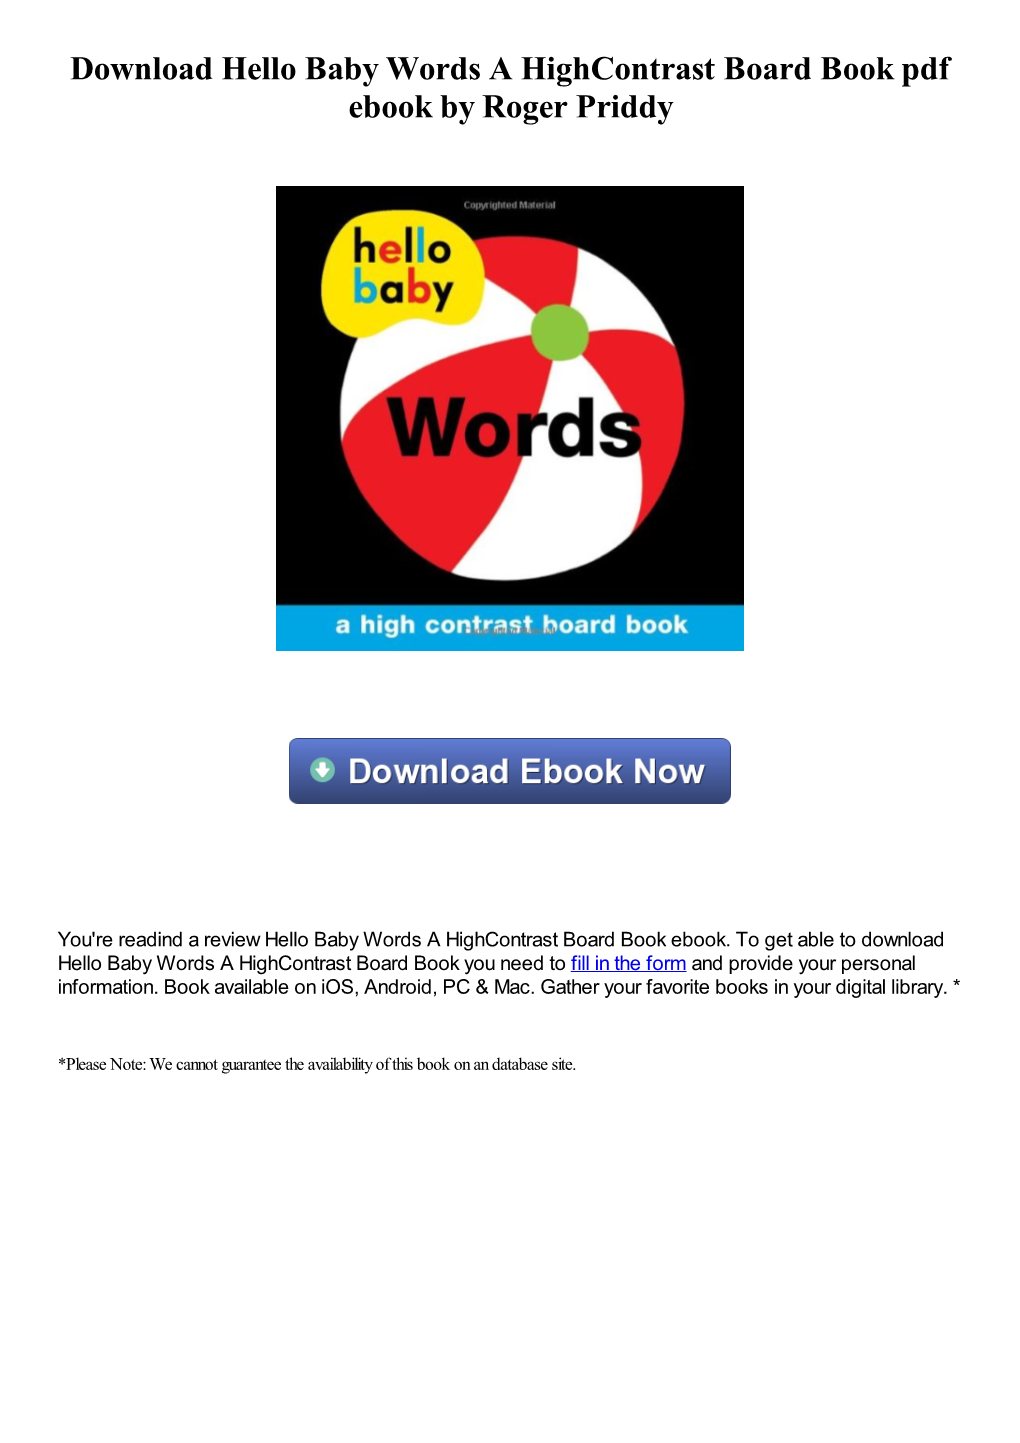 Download Hello Baby Words a Highcontrast Board Book Pdf Ebook by Roger Priddy